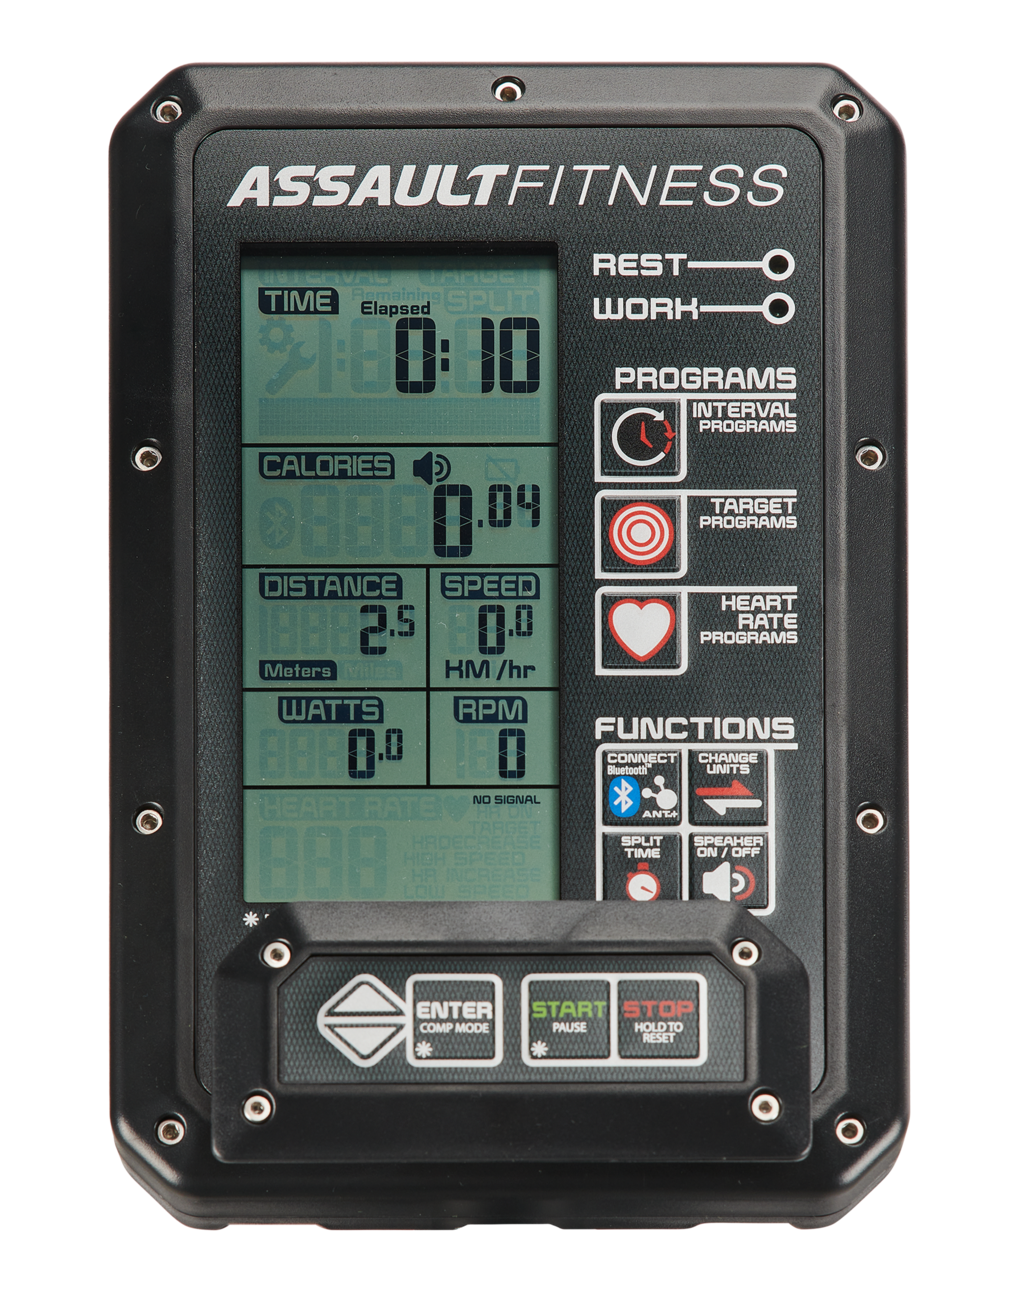 Improved console with LCD display with the AssaultBike Elite